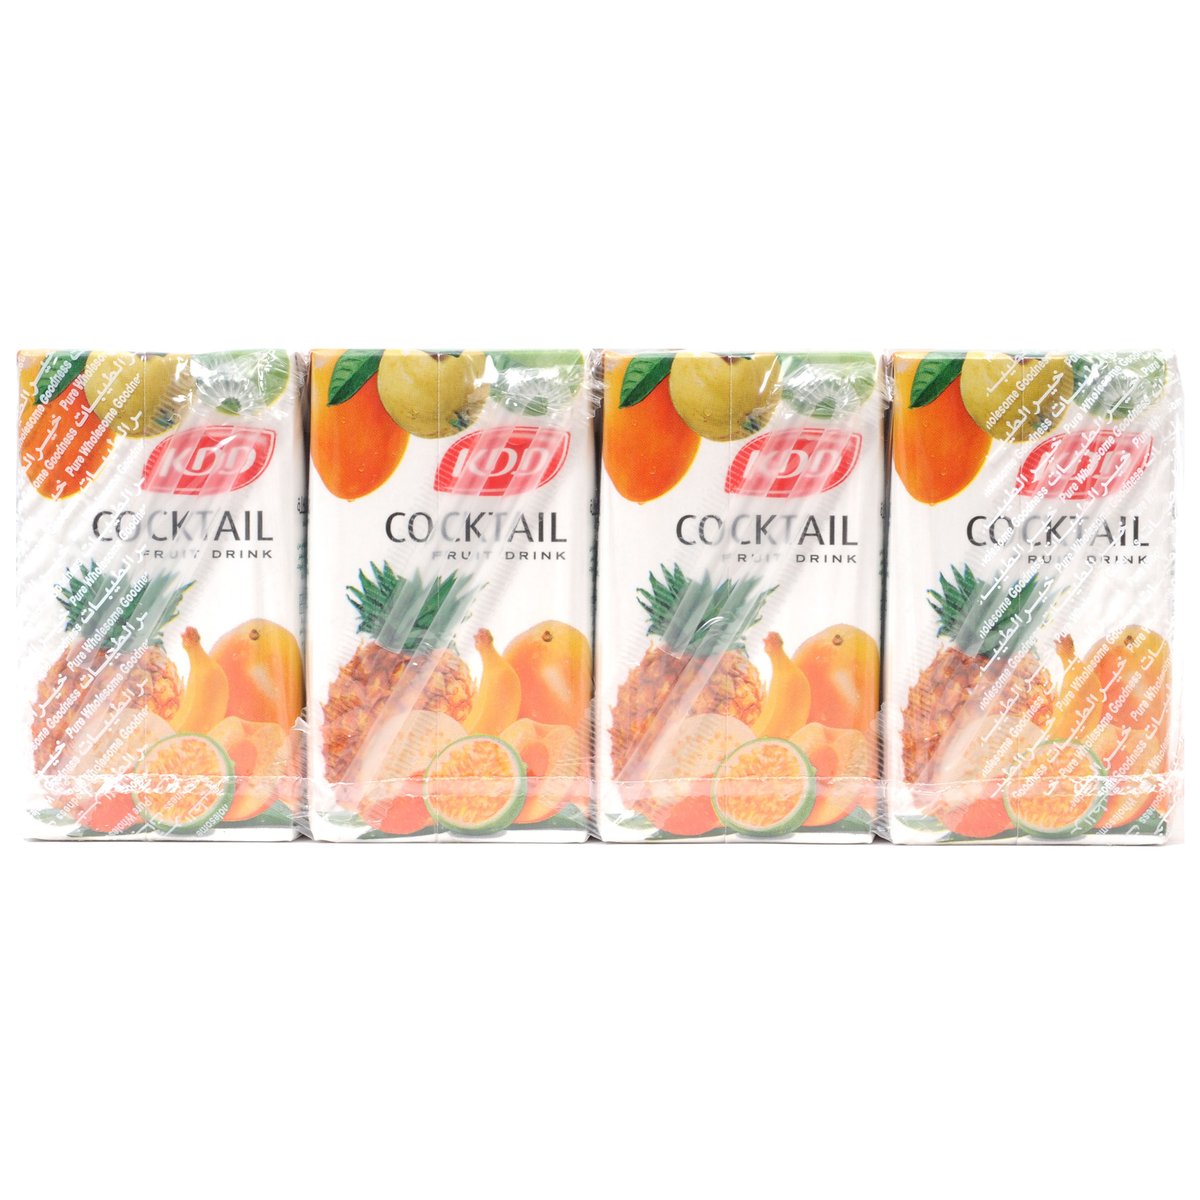 KDD Cocktail Drink 250ml x 6 Pieces